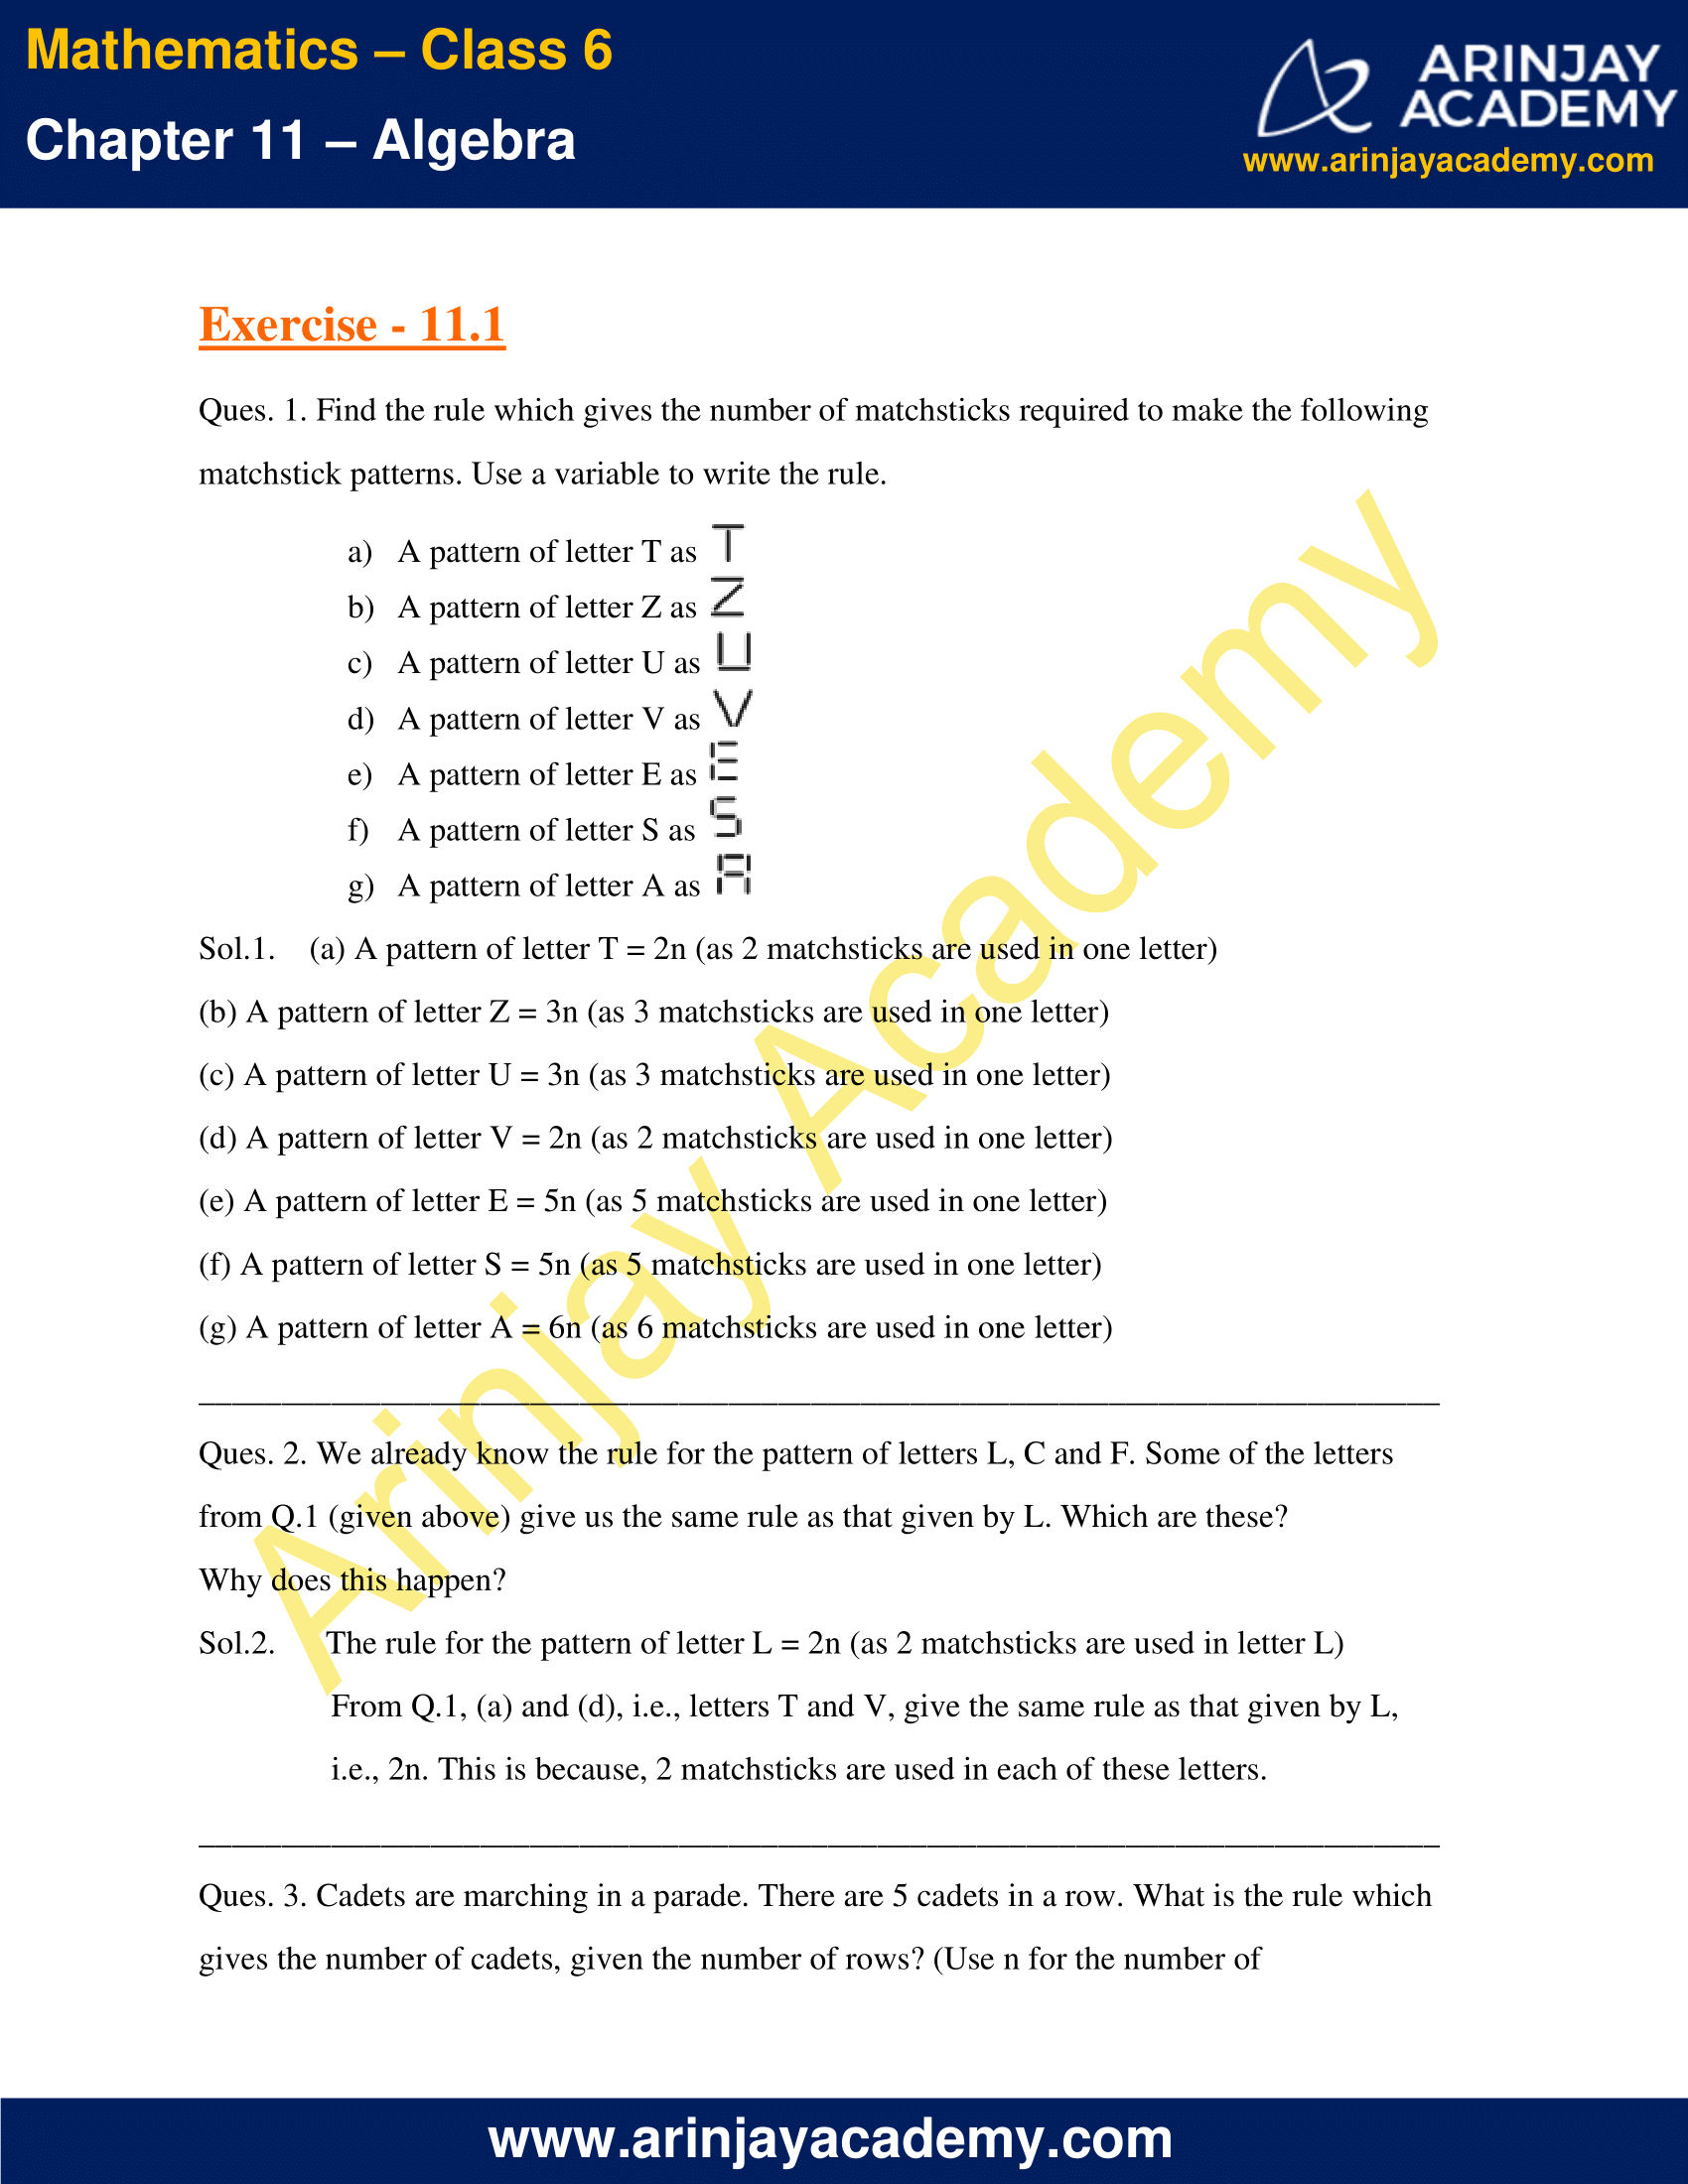 NCERT Solutions for Class 6 Maths Chapter 11 Exercise 11.1 image 1